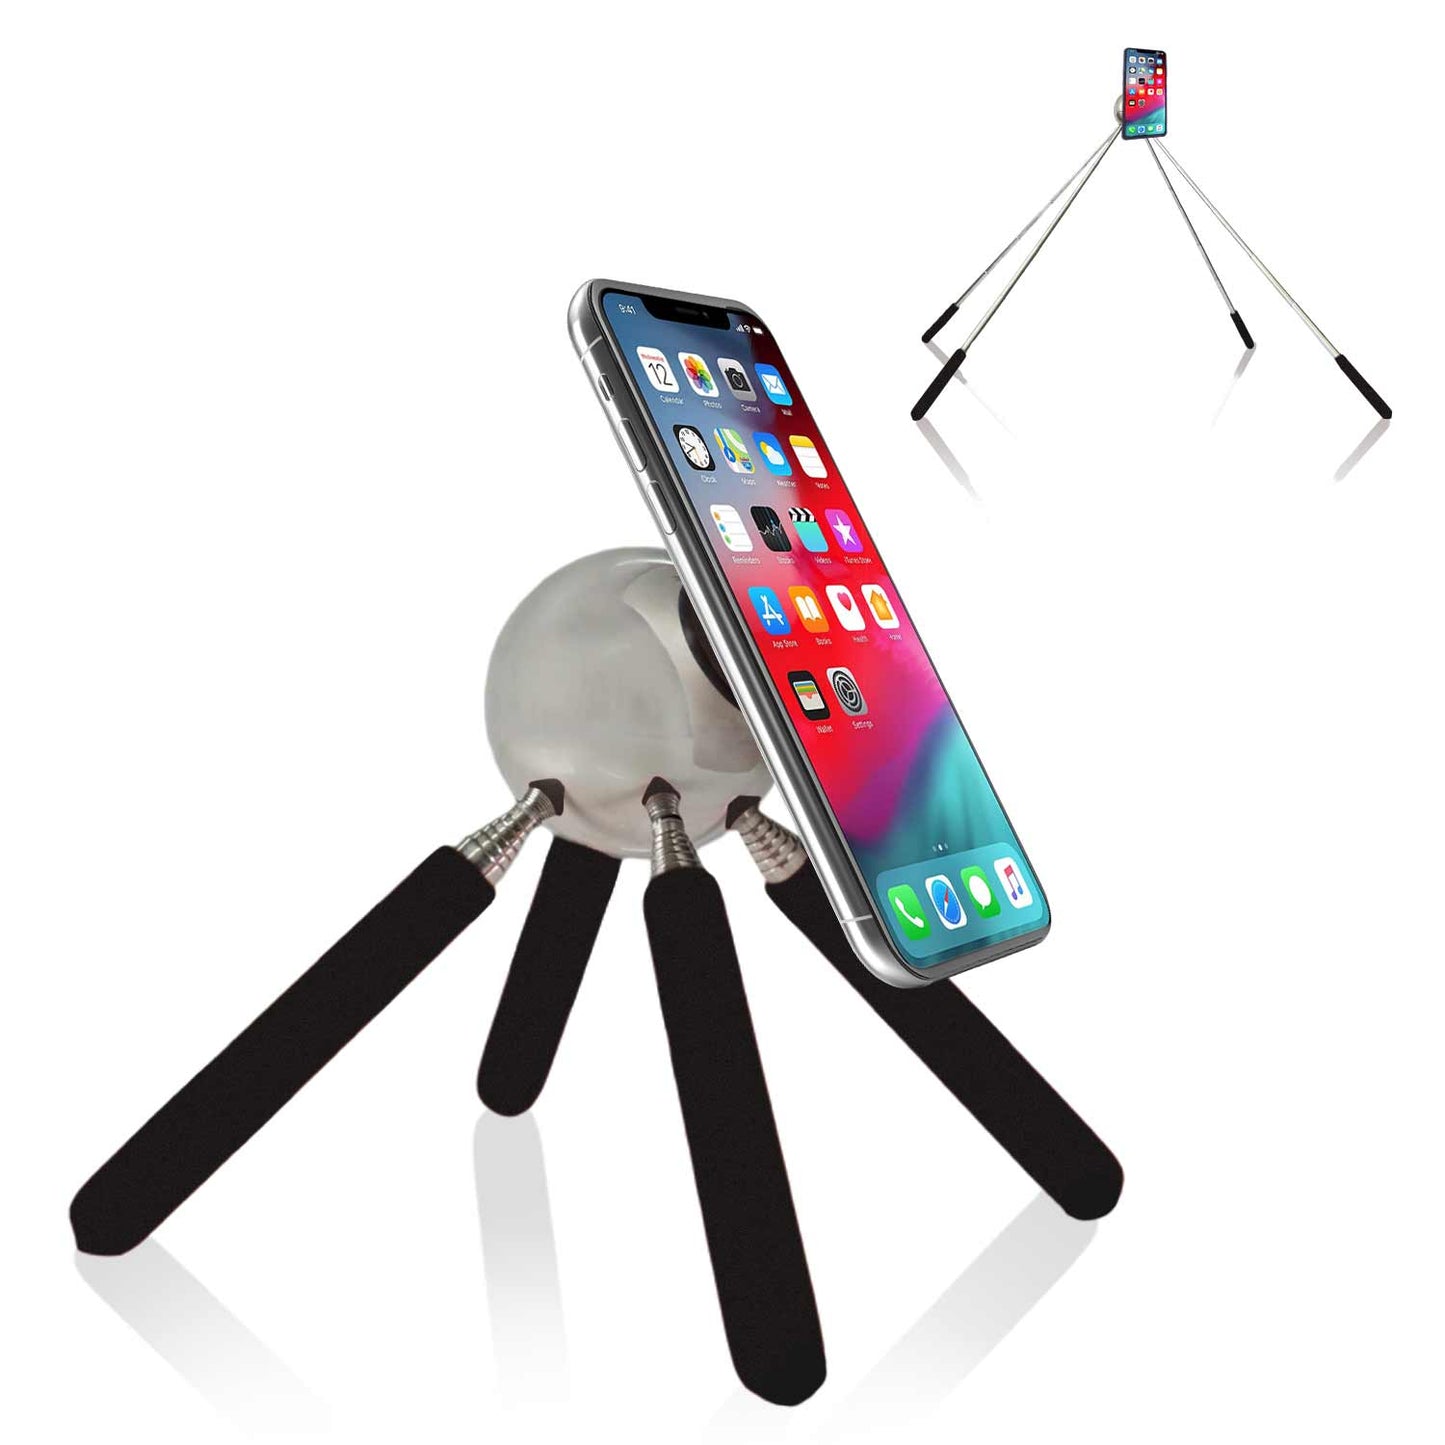 Tipatent Cellphone Stand